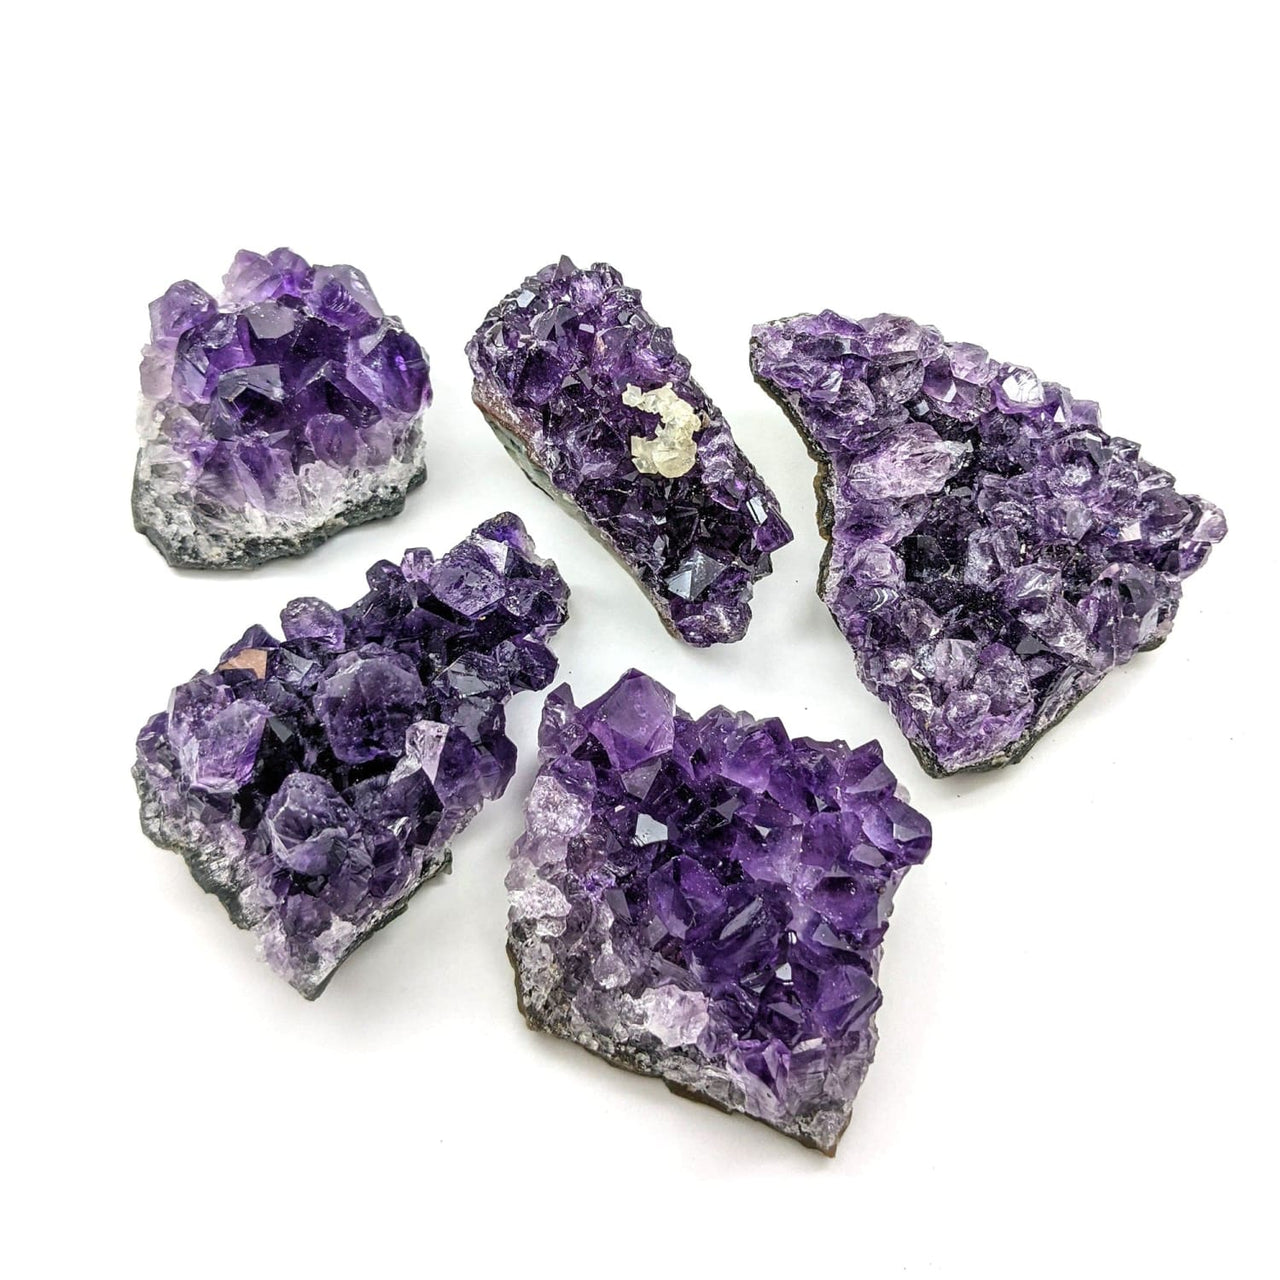 1 Amethyst Geode Grade A From Uruguay - You Pick Size 